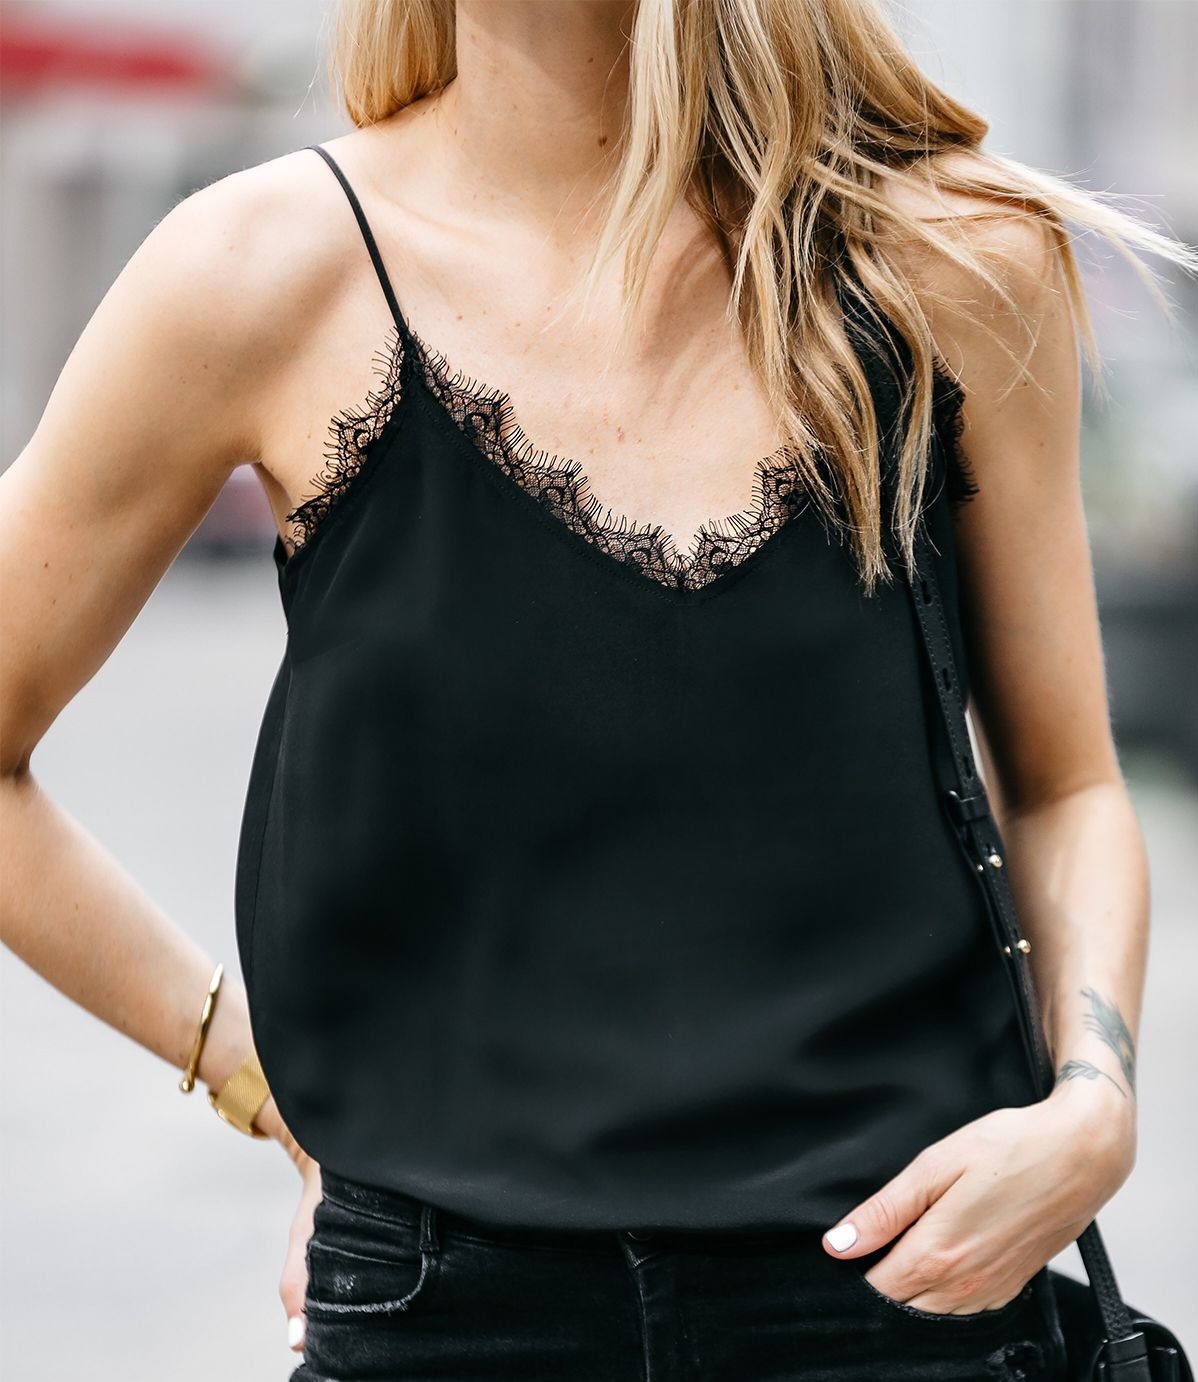 Why Cami Tops are Perfect for Making Shirts Less Revealing - my fashion life